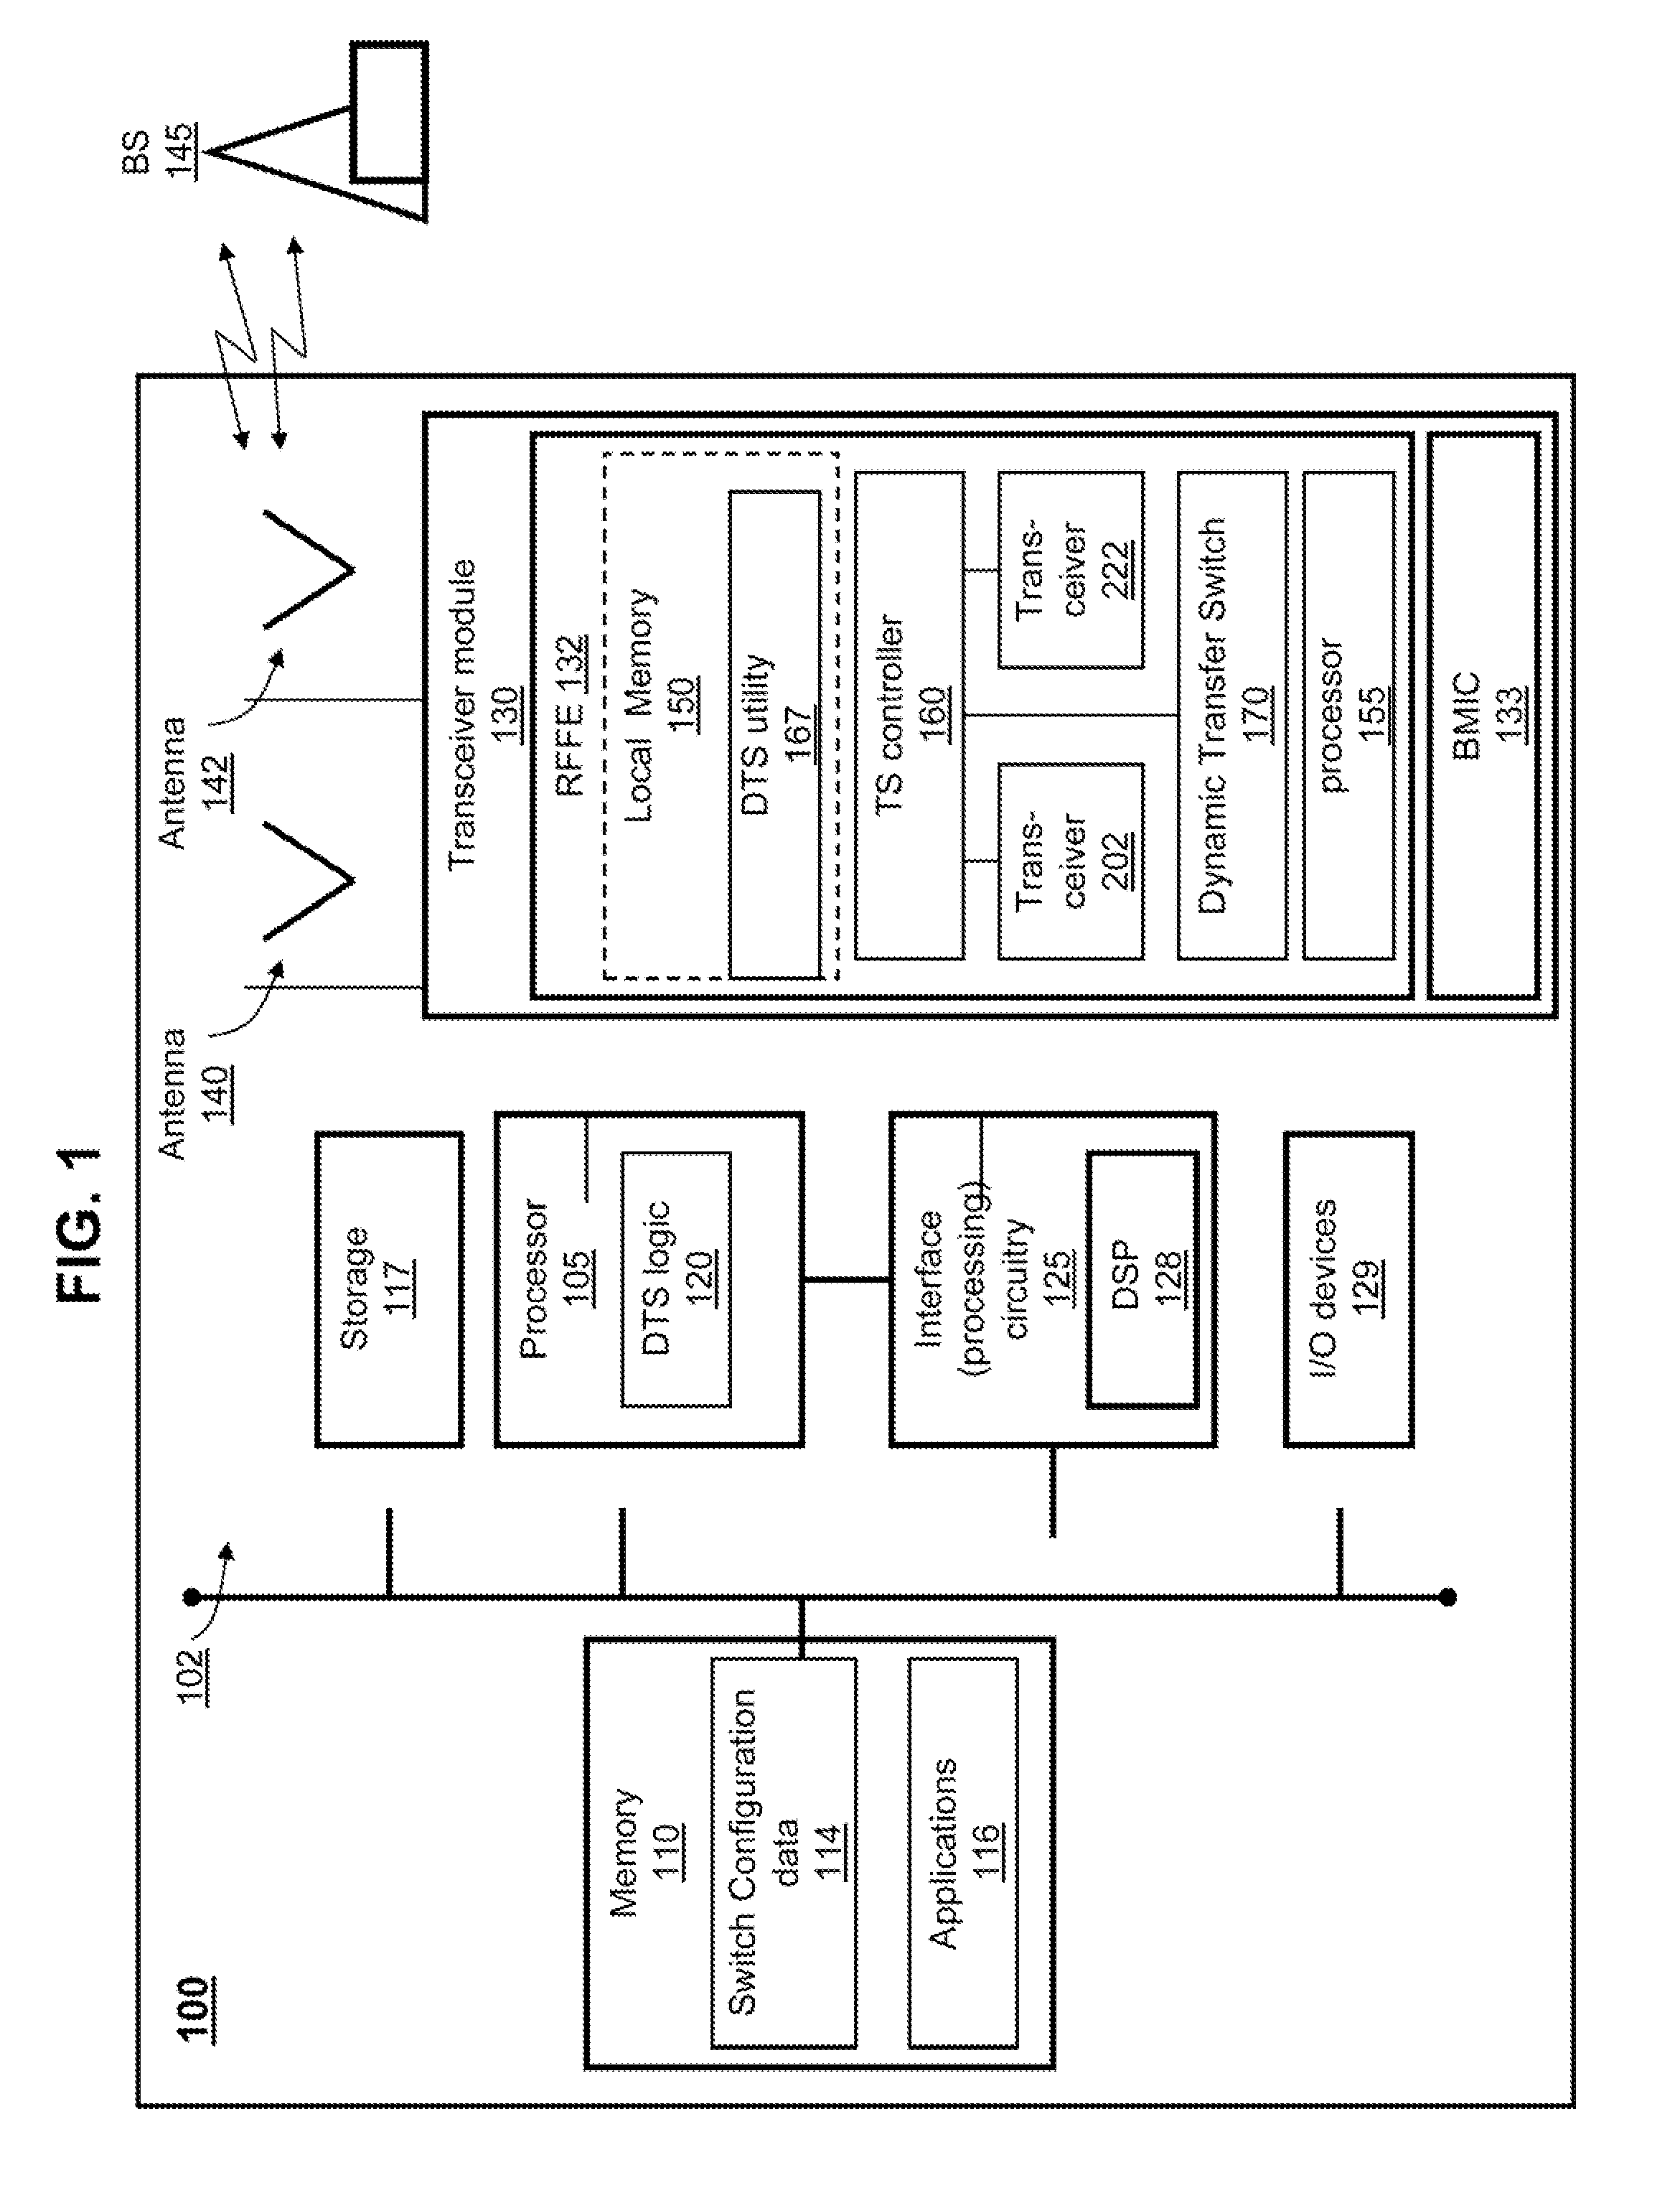 Antenna transfer switching for simultaneous voice and data